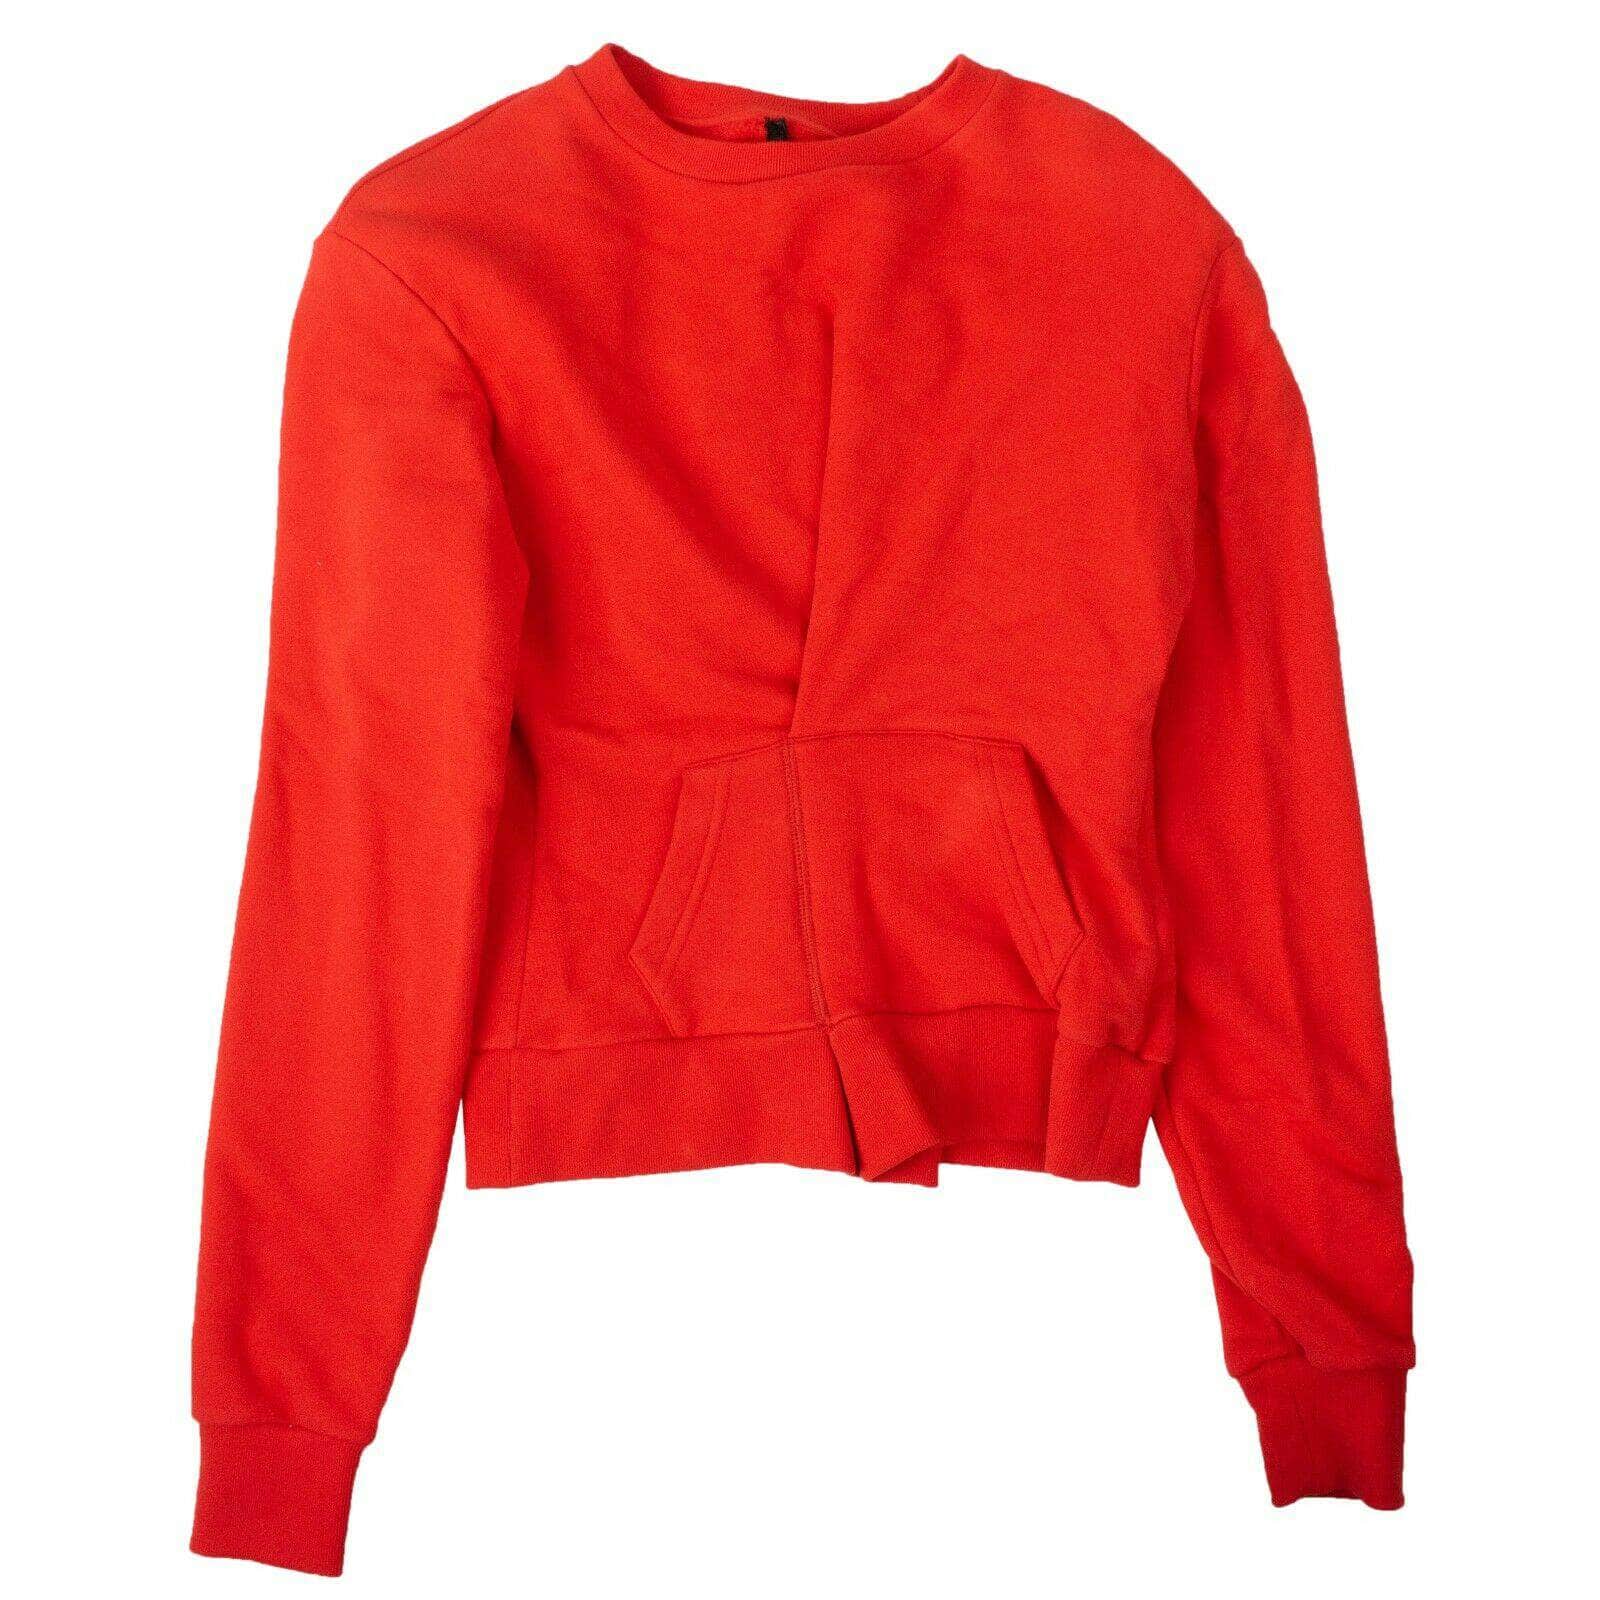 Unravel Project channelenable-all, chicmi, couponcollection, gender-womens, main-clothing, size-m, size-s, size-xs, under-250, unravel-project, womens-crewneck-sweaters S Red Folded Detail Sweater 82NGG-UN-1081/S 82NGG-UN-1081/S